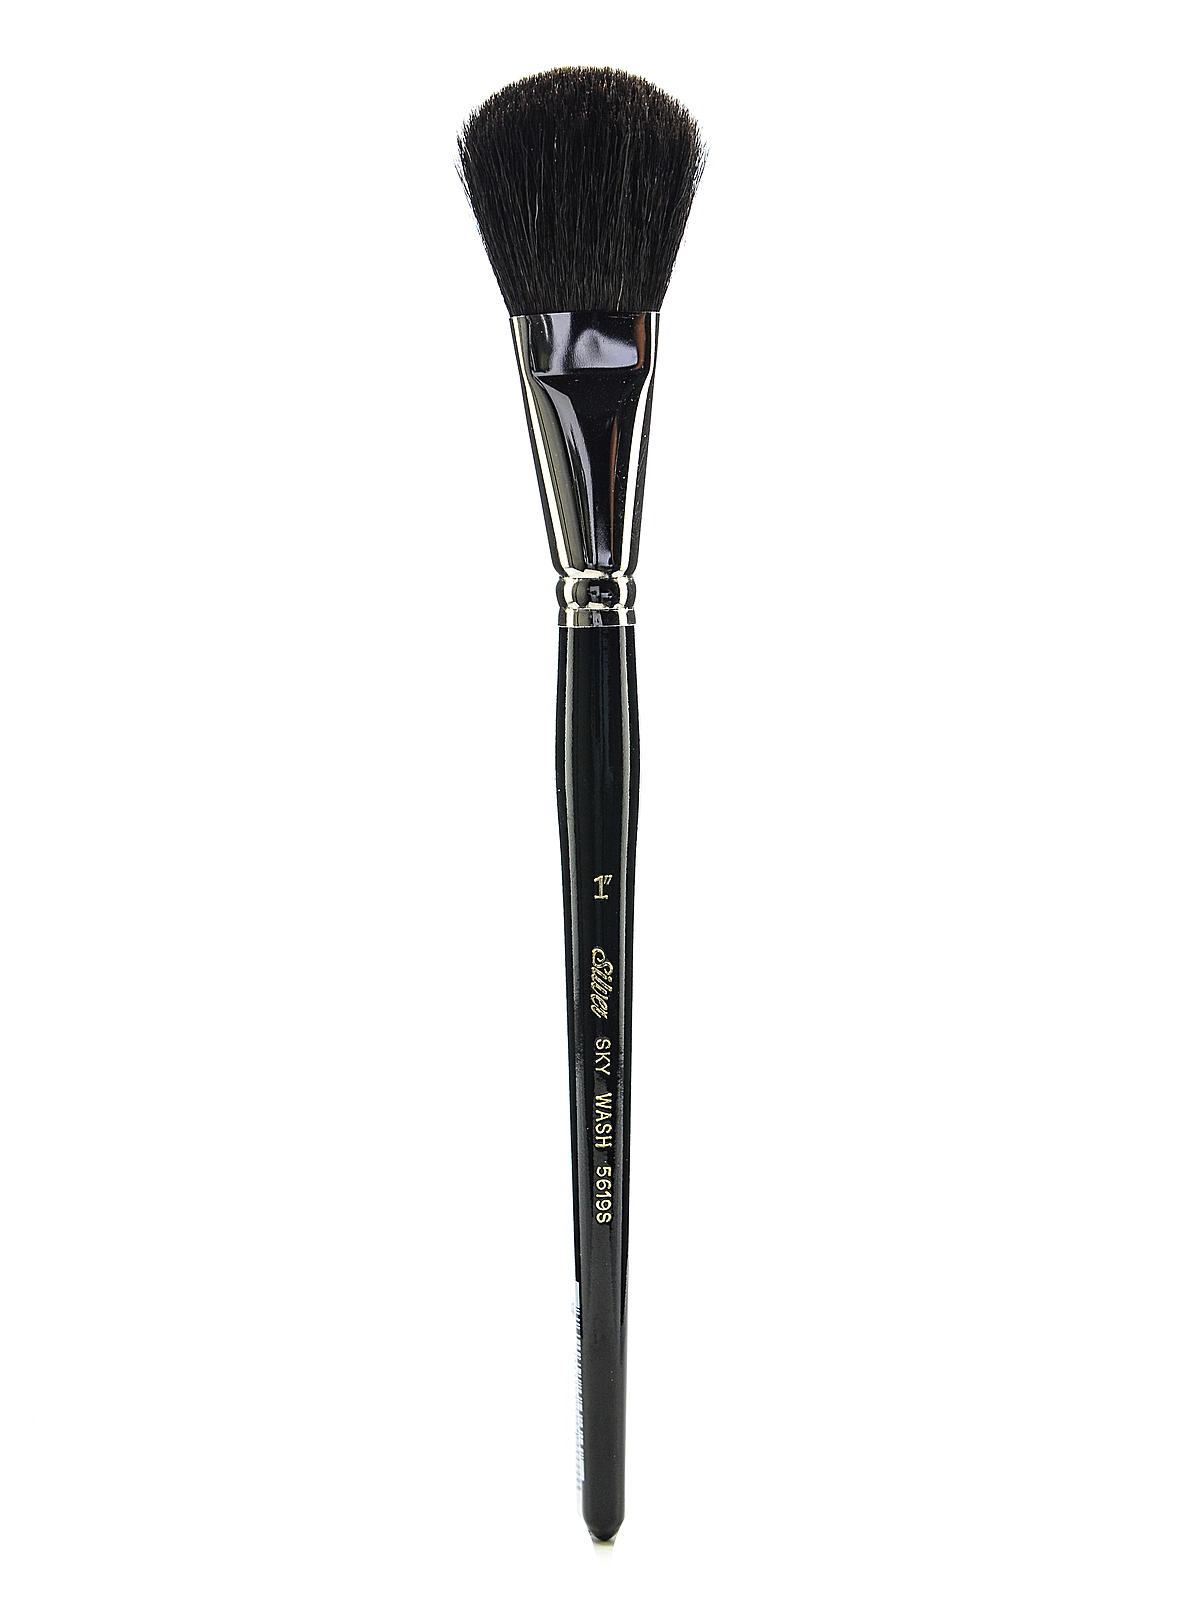 Black Round Oval Mop Brushes 1 In. Oval Mop 5619